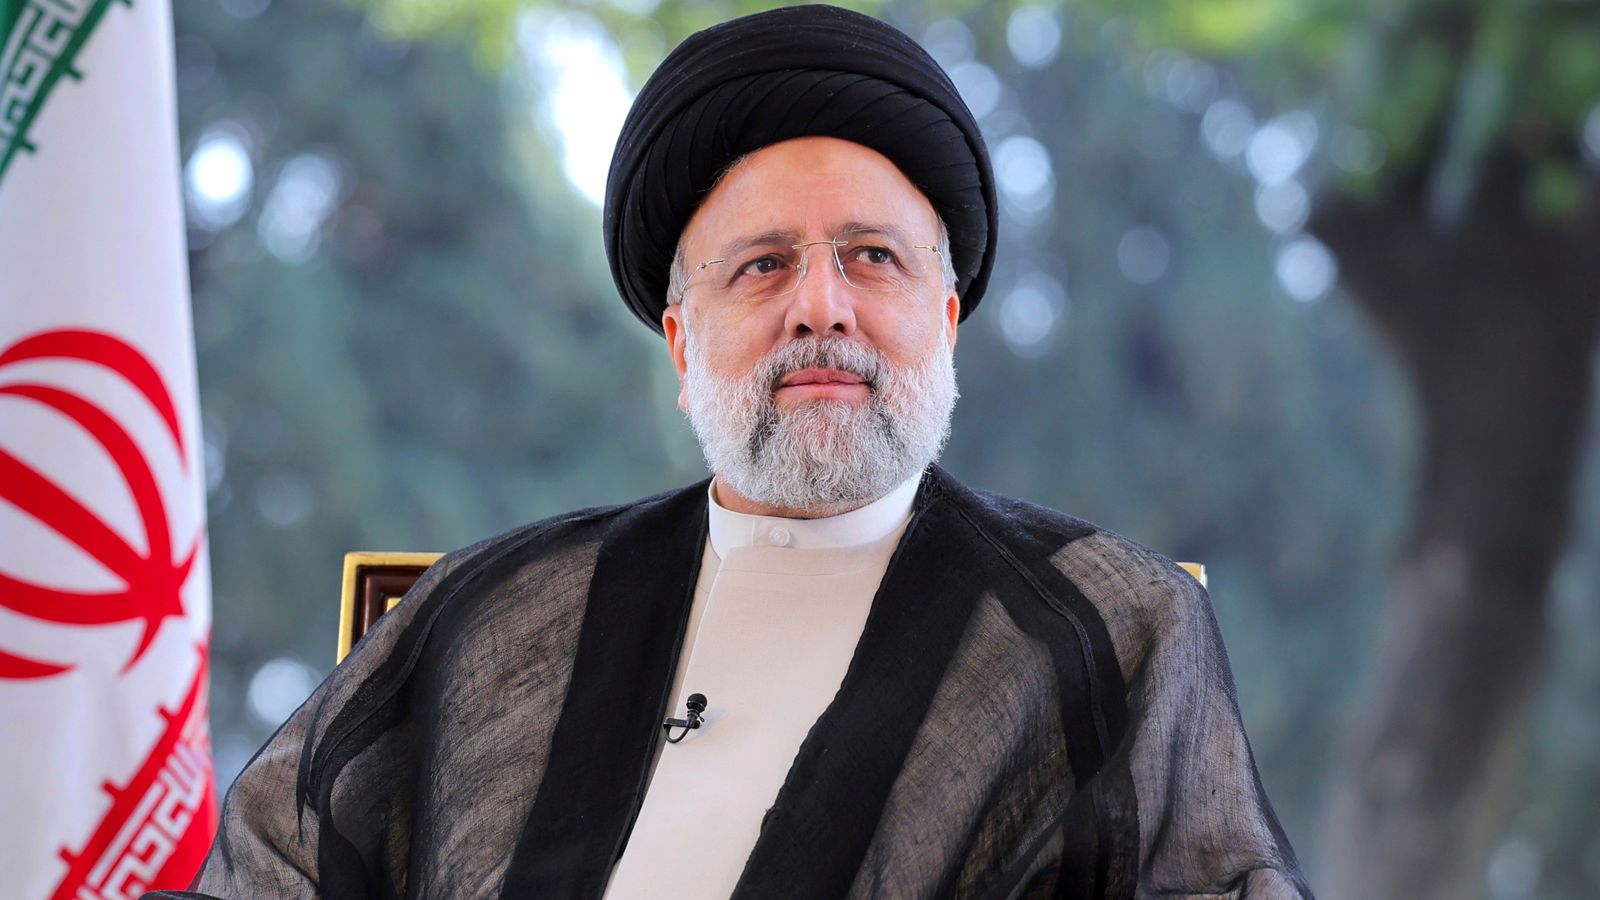 Iranian president Ebrahim Raisi has died after helicopter crash - reports